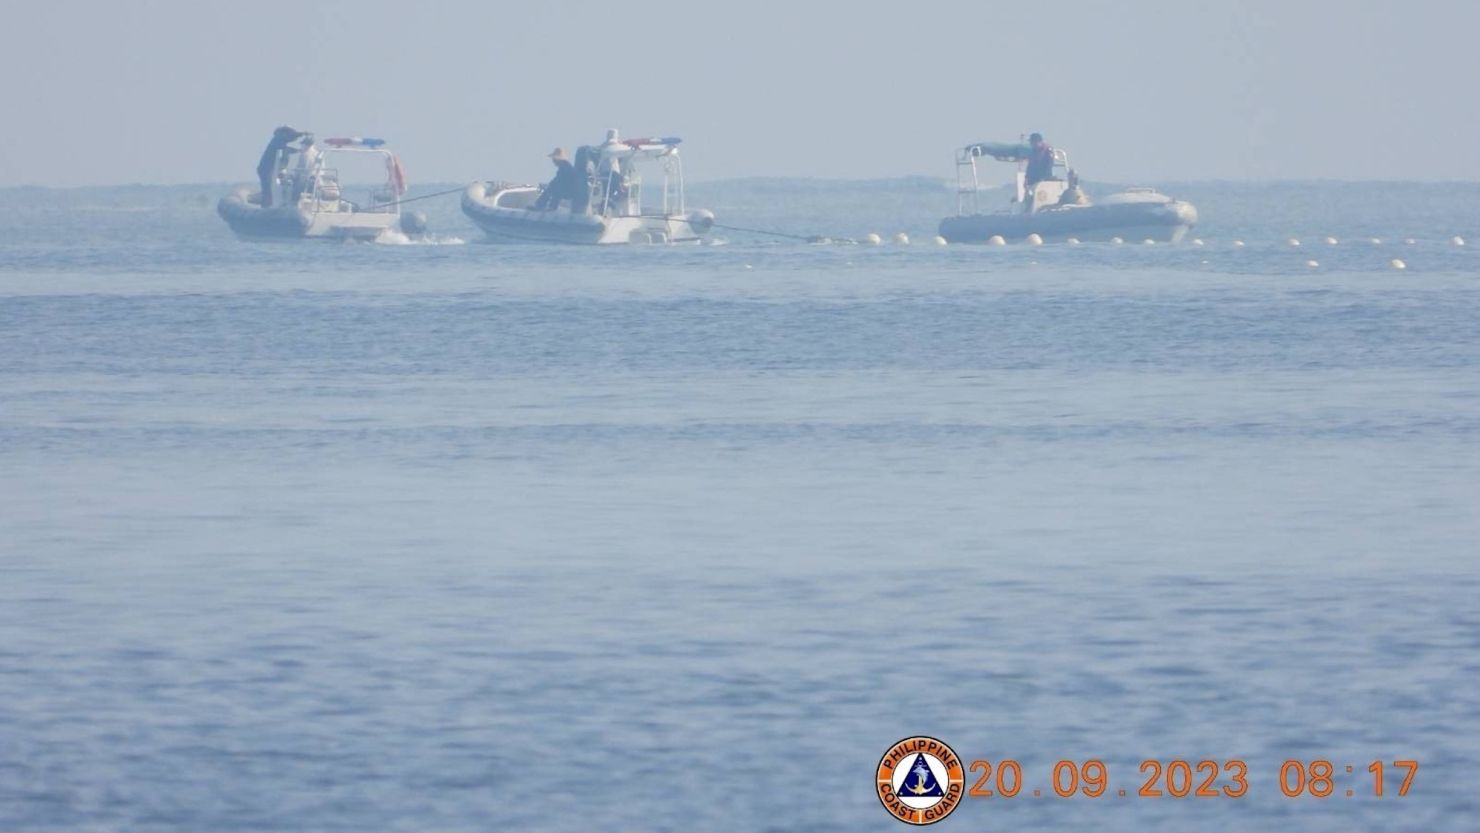 Chinese Coast Guard boats close to the floating barrier are pictured on September 20, 2023, near the Scarborough Shoal in the South China Sea, in this handout image released by the Philippine Coast Guard on September 24, 2023. Philippine Coast Guard/Handout via REUTERS THIS IMAGE HAS BEEN SUPPLIED BY A THIRD PARTY. MANDATORY CREDIT. NO RESALES. NO ARCHIVES